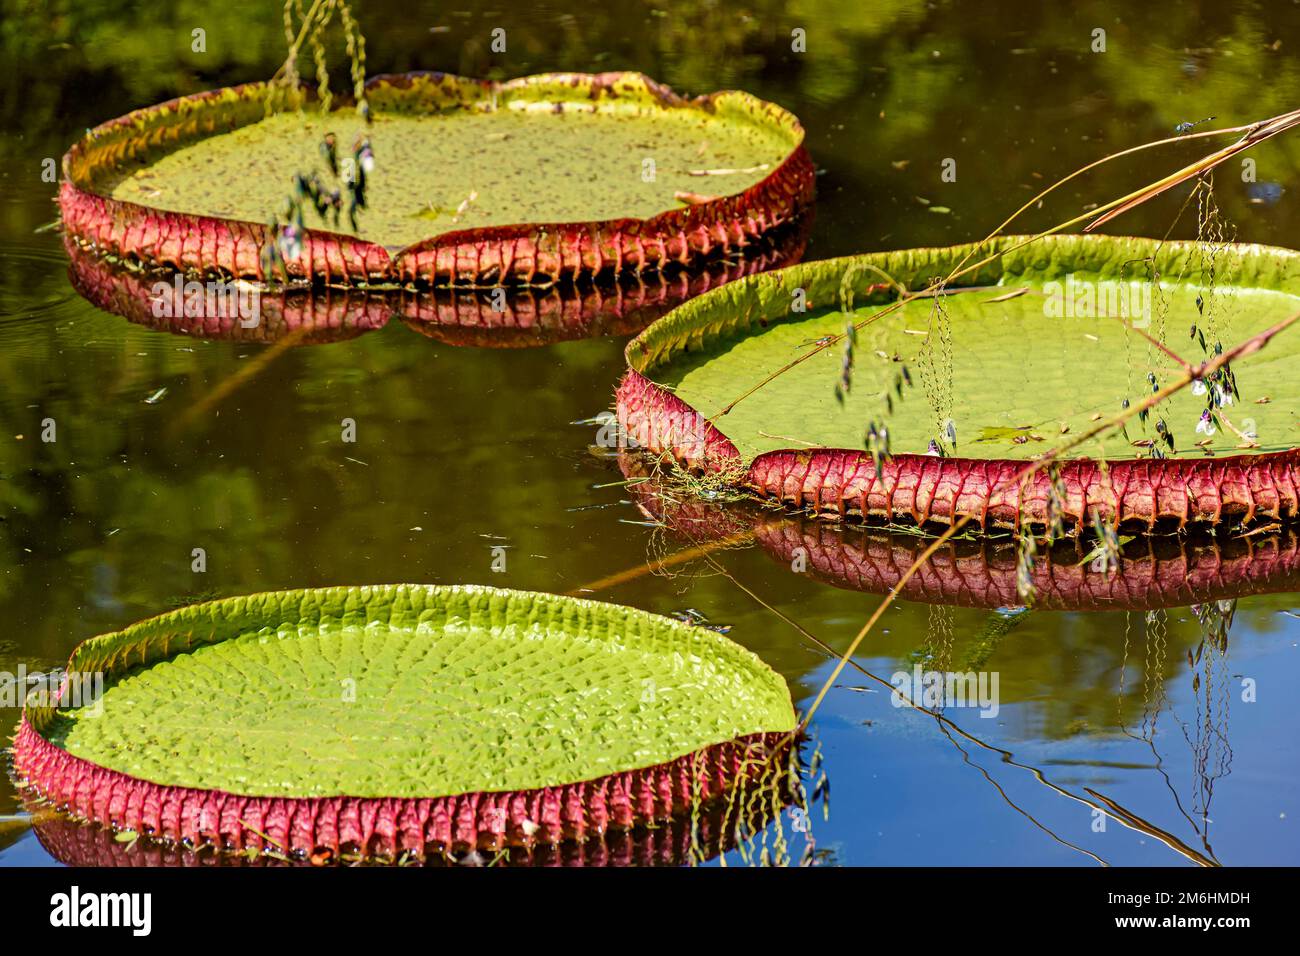 Water Lily typical of the Amazon region on lake Stock Photo